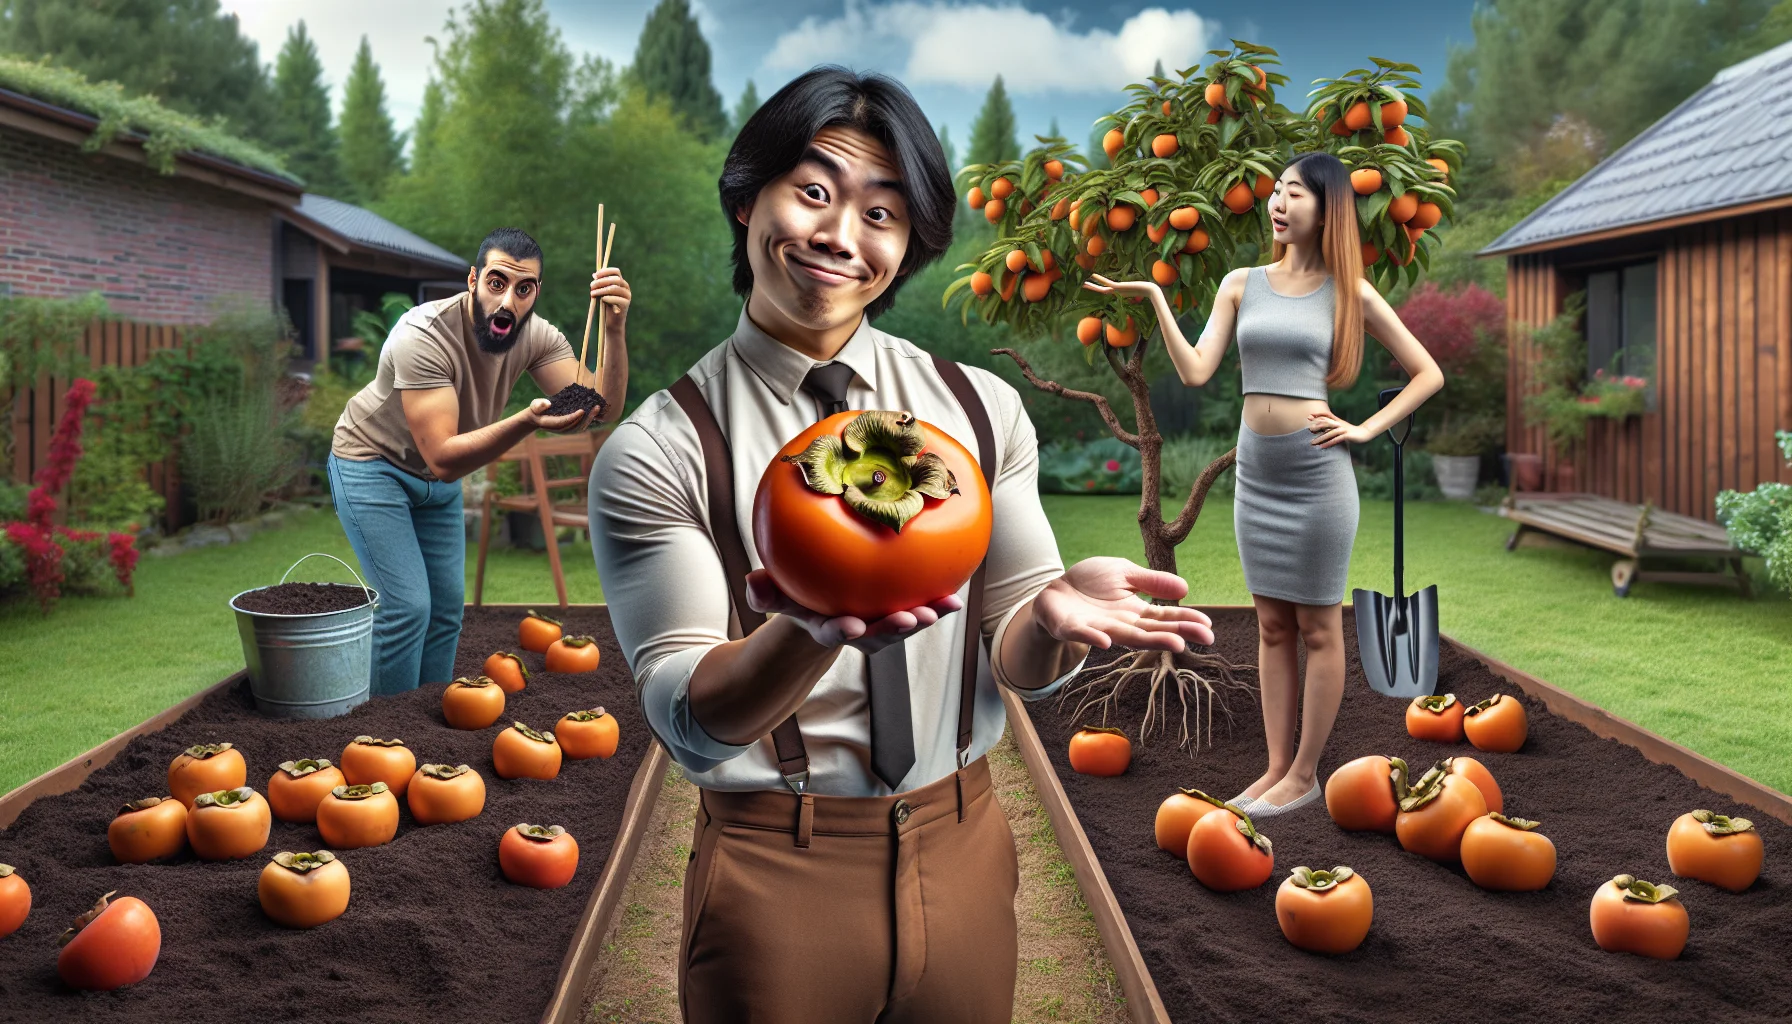 Imagine a humorously engaging and realistic scene set in a verdant garden. In the foreground, an Asian man is presenting a ripe persimmon. He holds it aloft like a prized possession, showing a cheeky smile. Beside him, a Middle-Eastern woman is preparing to taste a slice of persimmon with an excited look. In the background, a Caucasian youth is planting a persimmon seed with hopeful eyes. Beautiful persimmon trees scattered around the garden, promising a bounty of fruit, encouraging viewers to enjoy gardening and savor this delicious fruit.